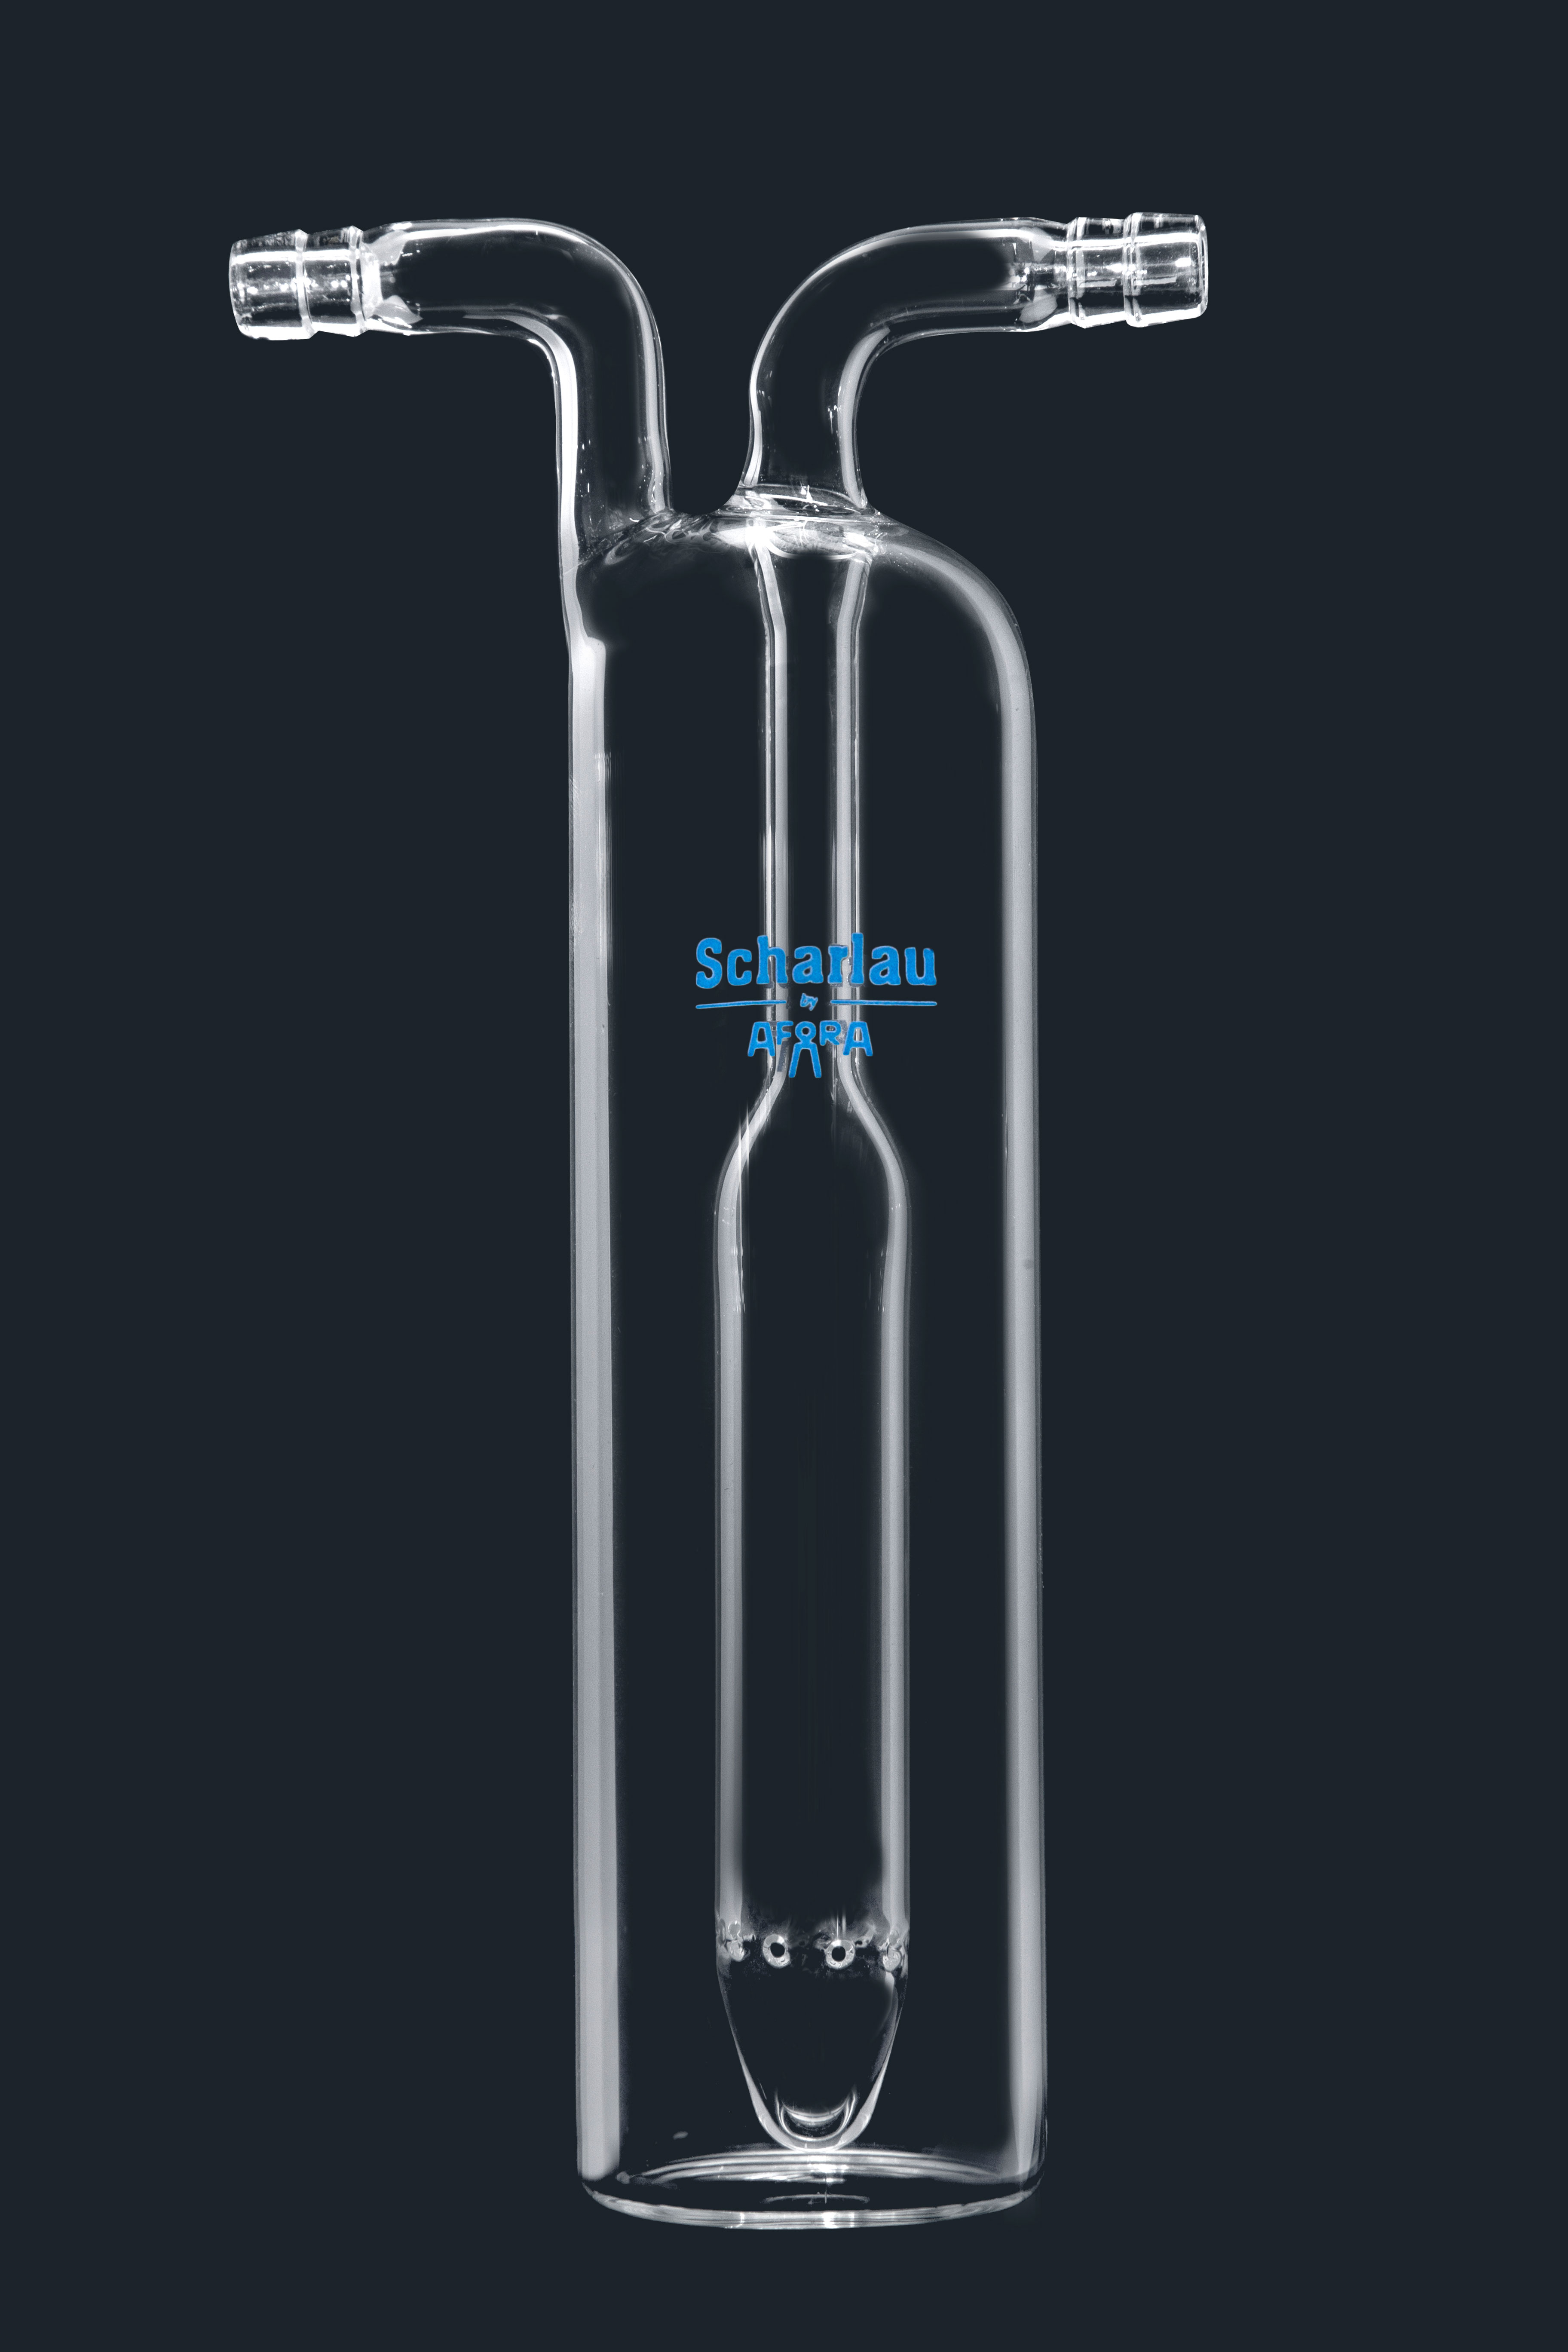 Muencke gas washing bottle with jointed glass connections